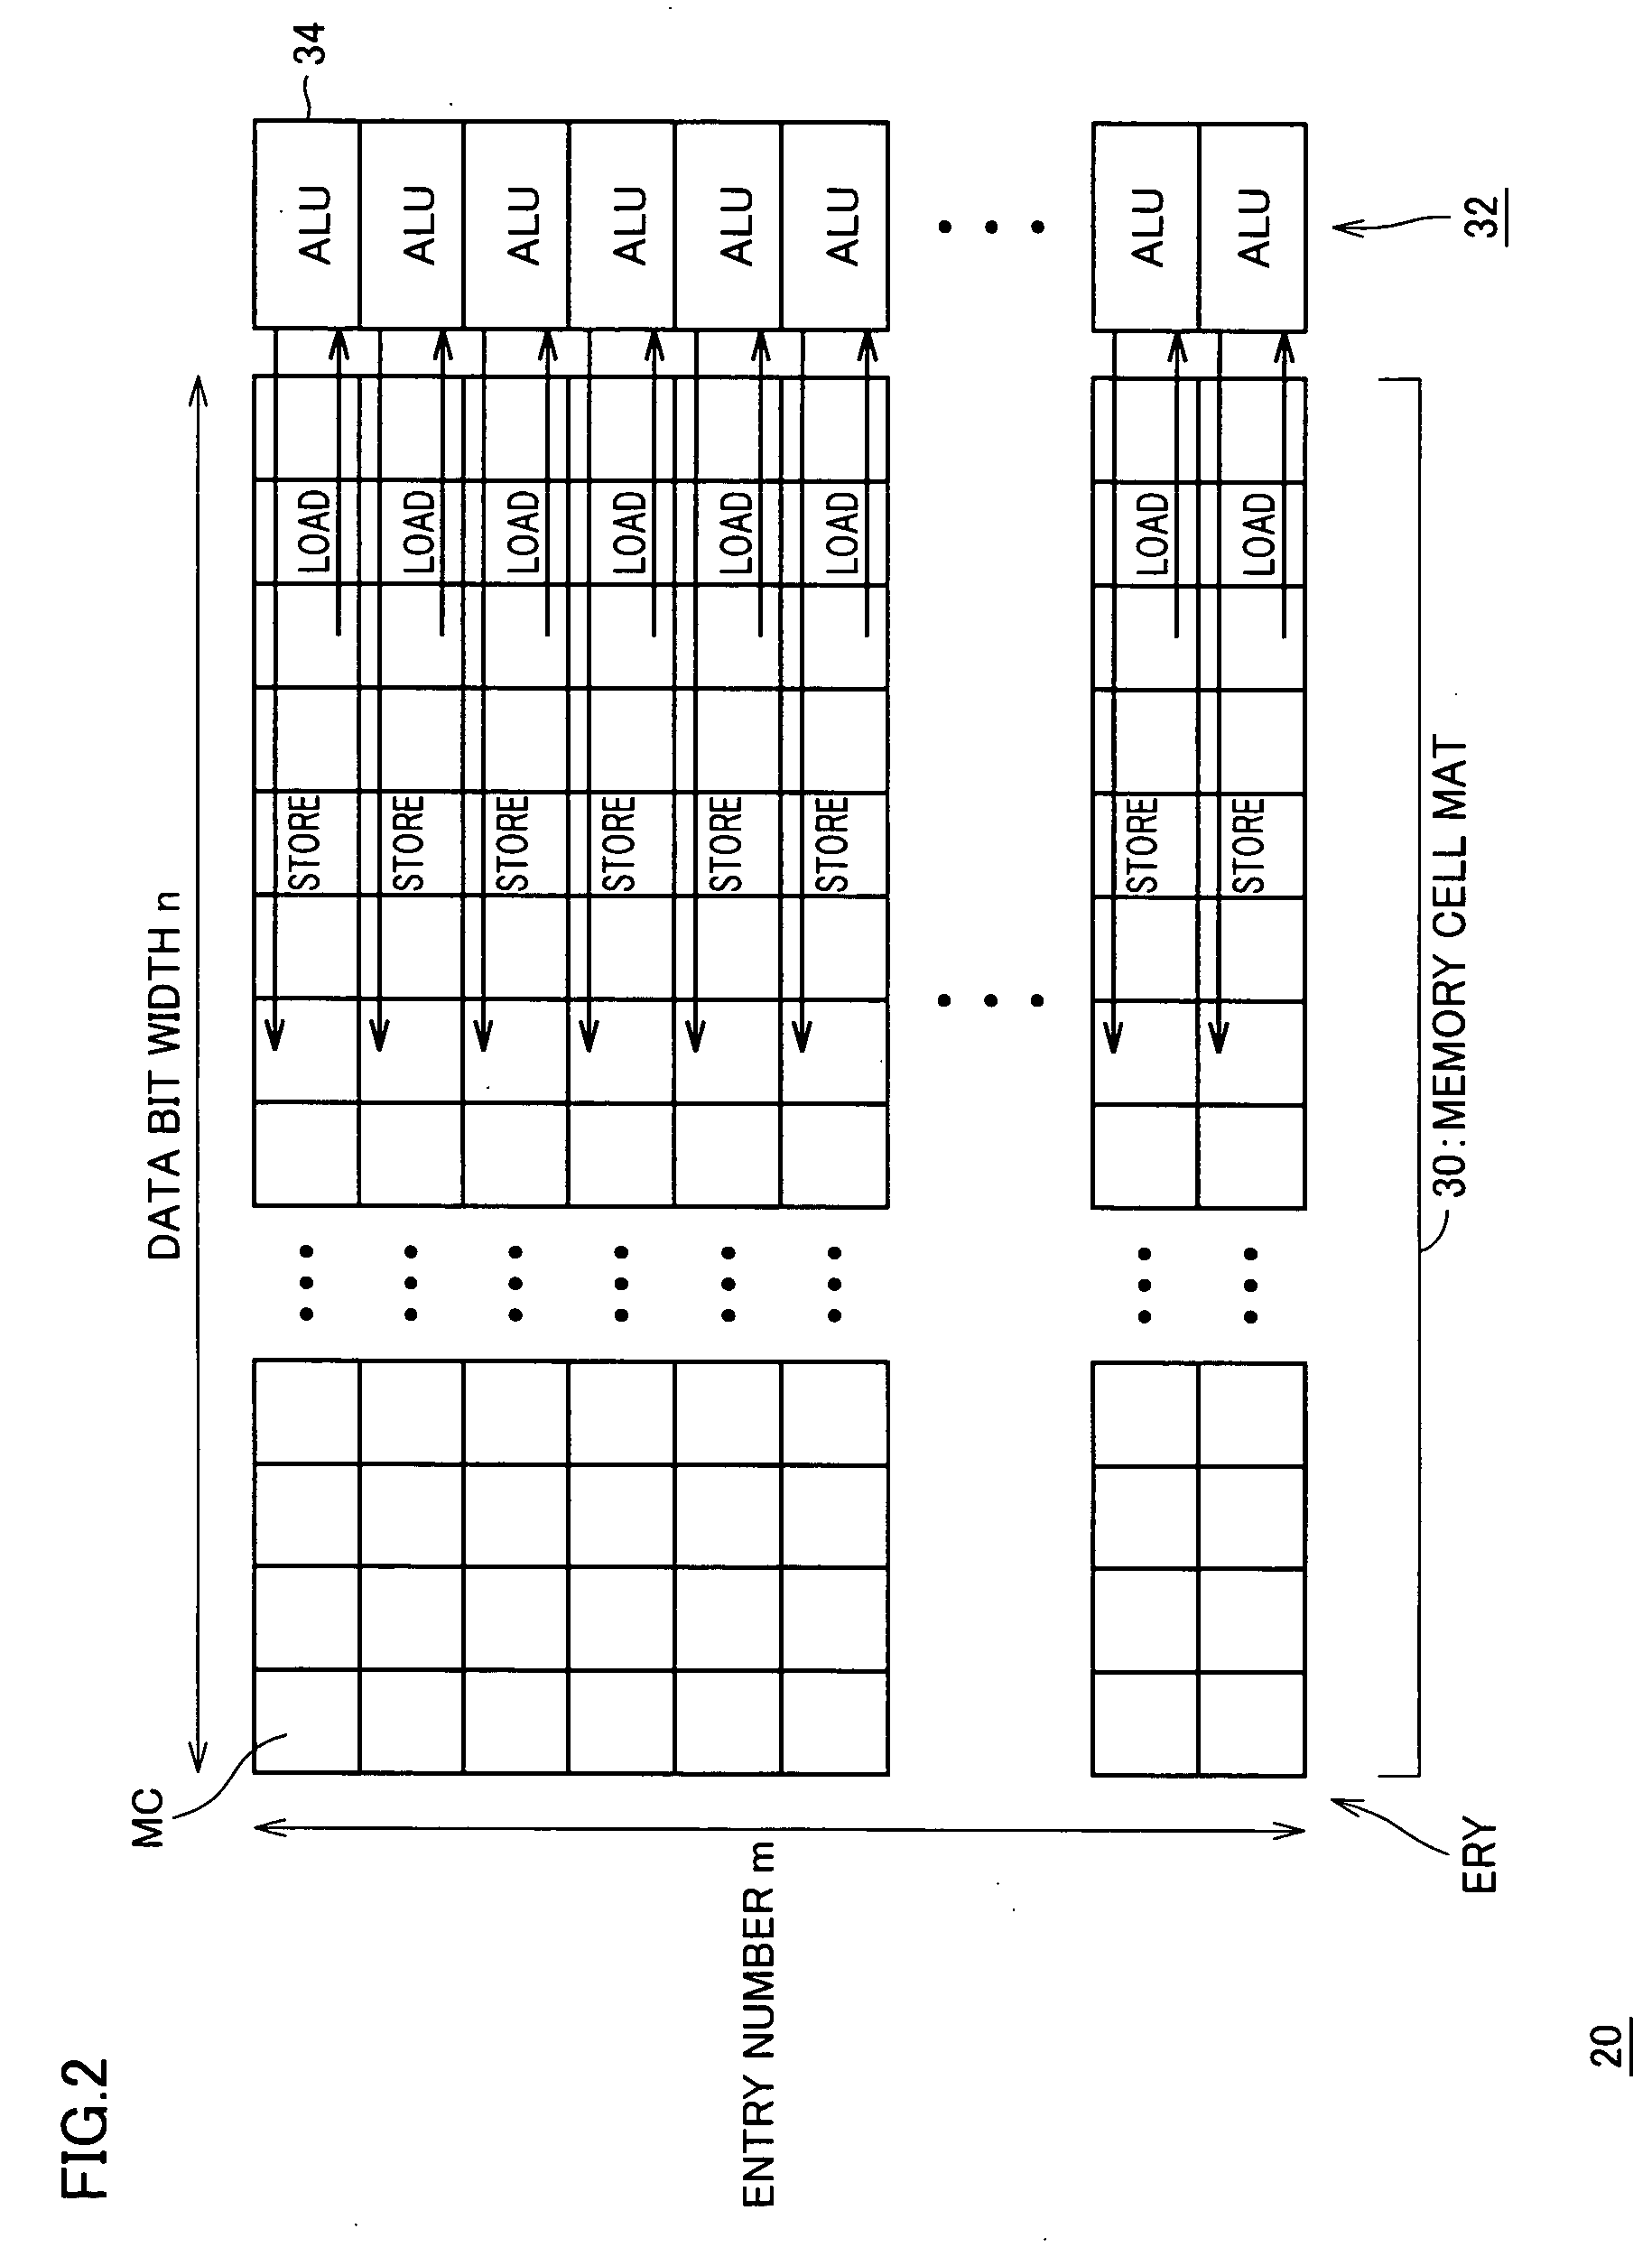 Semiconductor signal processing device